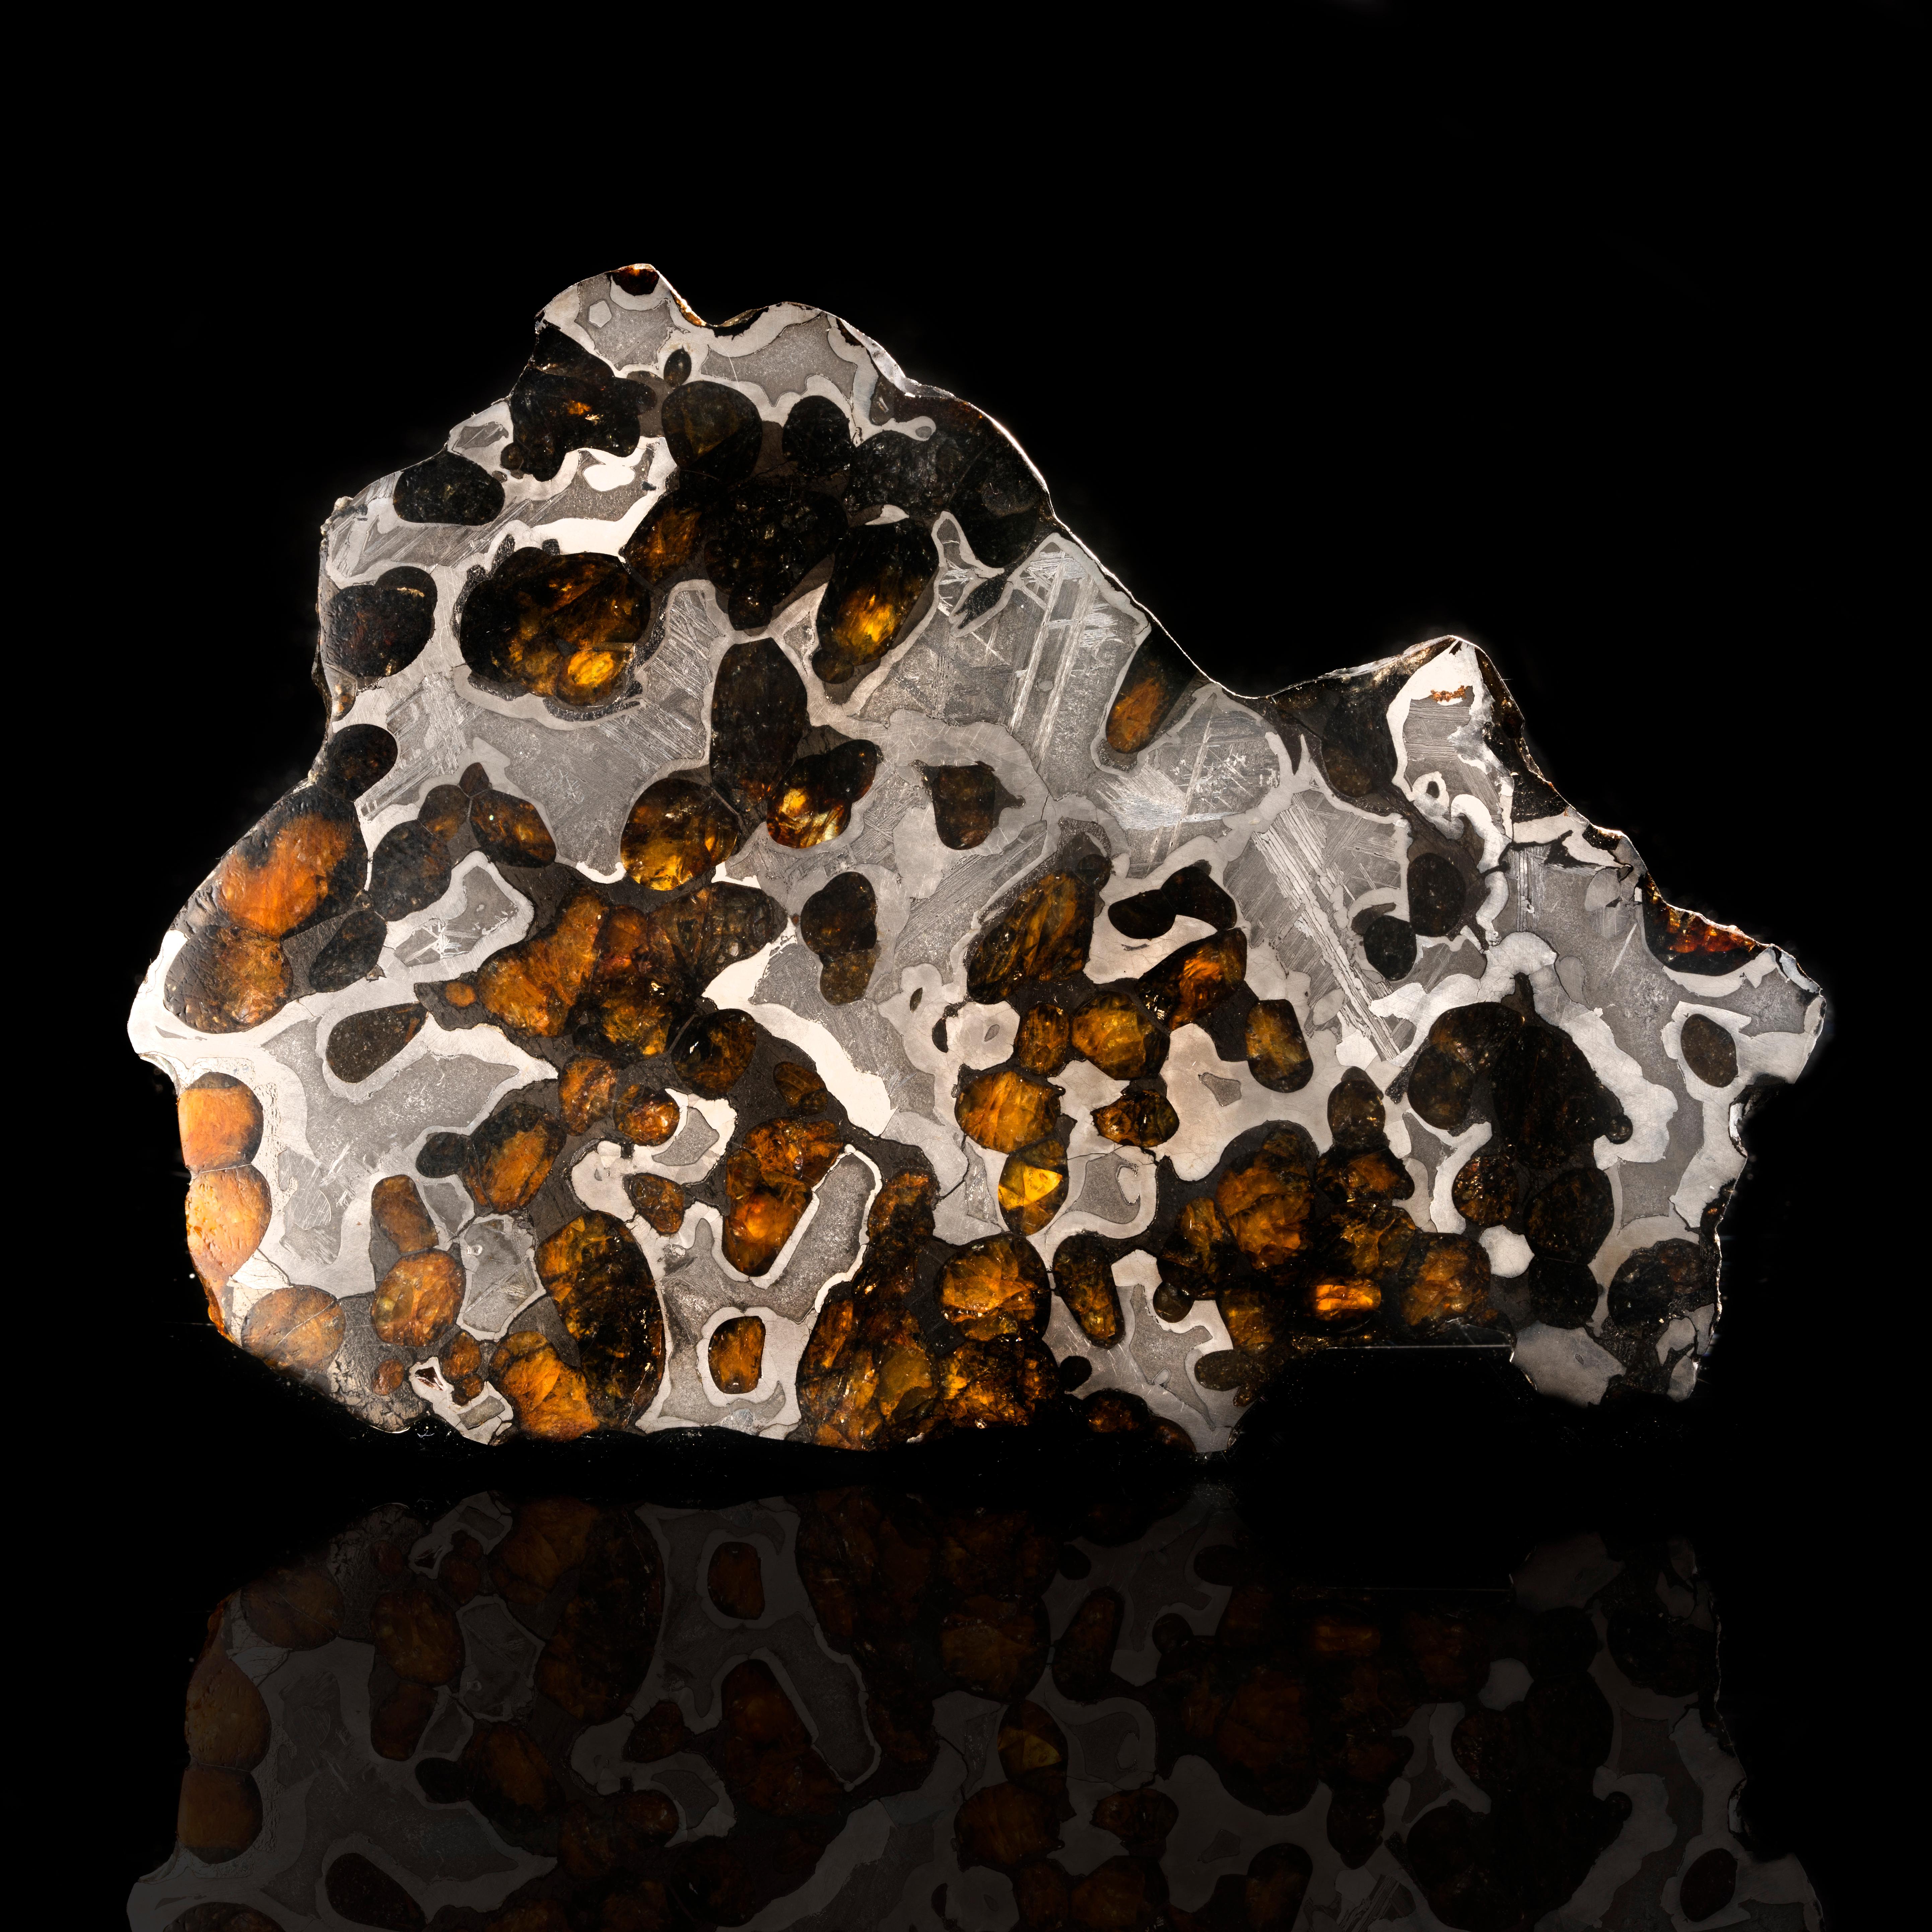 The Brenham meteorite is a pallasite meteorite found in Kansas in 1882. It is one of only a few pallasite meteorites, a type of meteorite with beautiful green and orange olivine crystals growing within a coarse octahedrite stony-iron pattern.